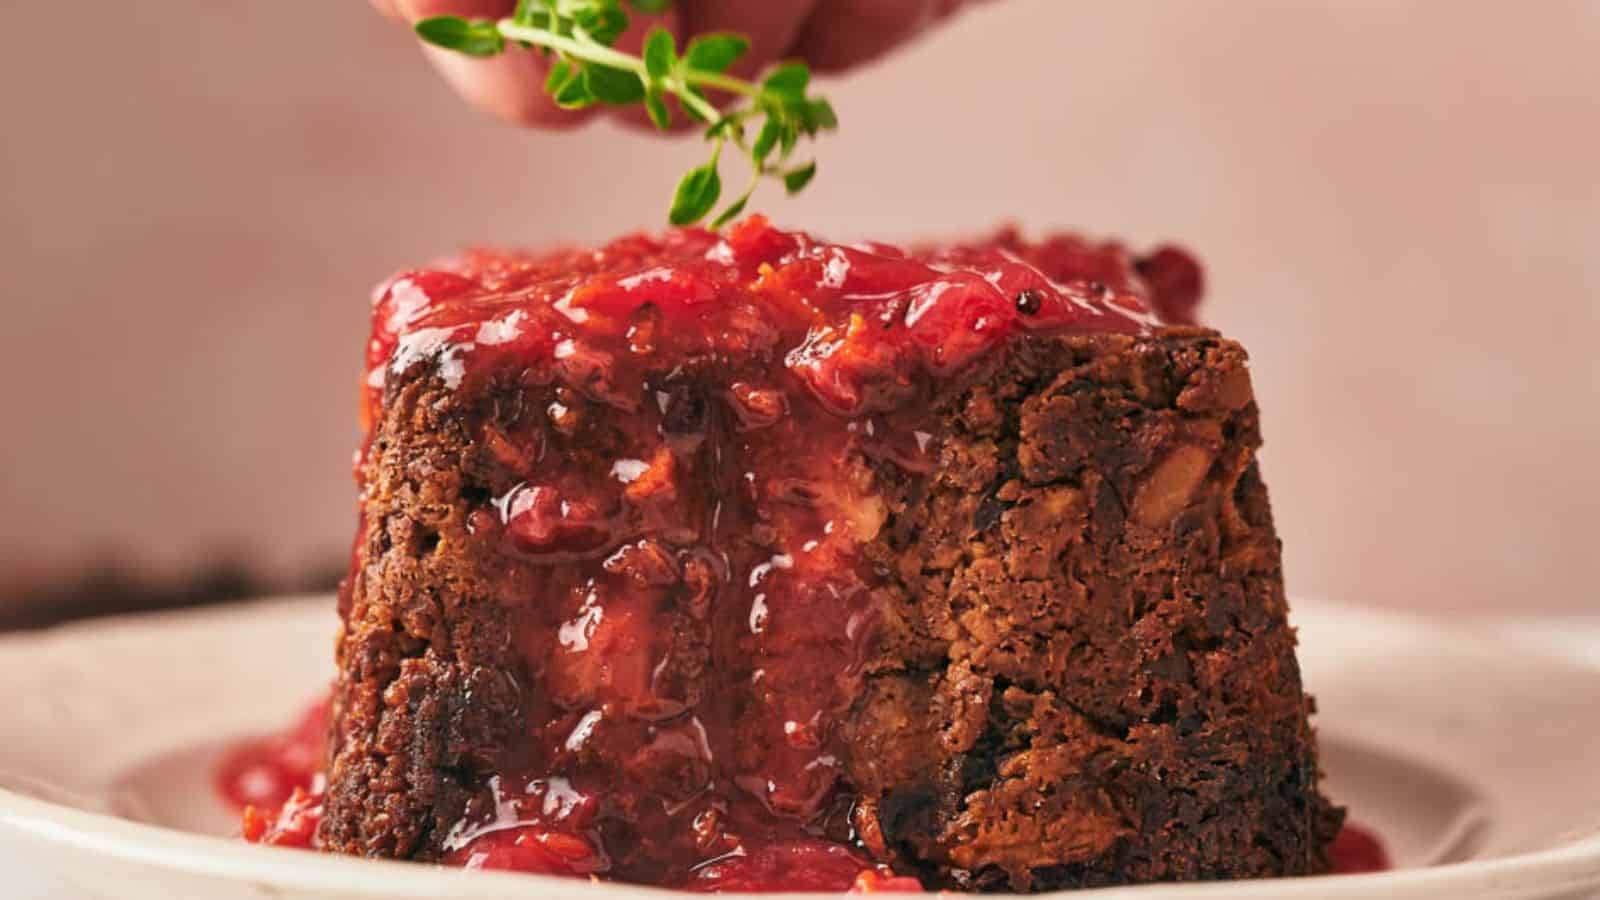 Nut roast with cranberry sauce on a plate.